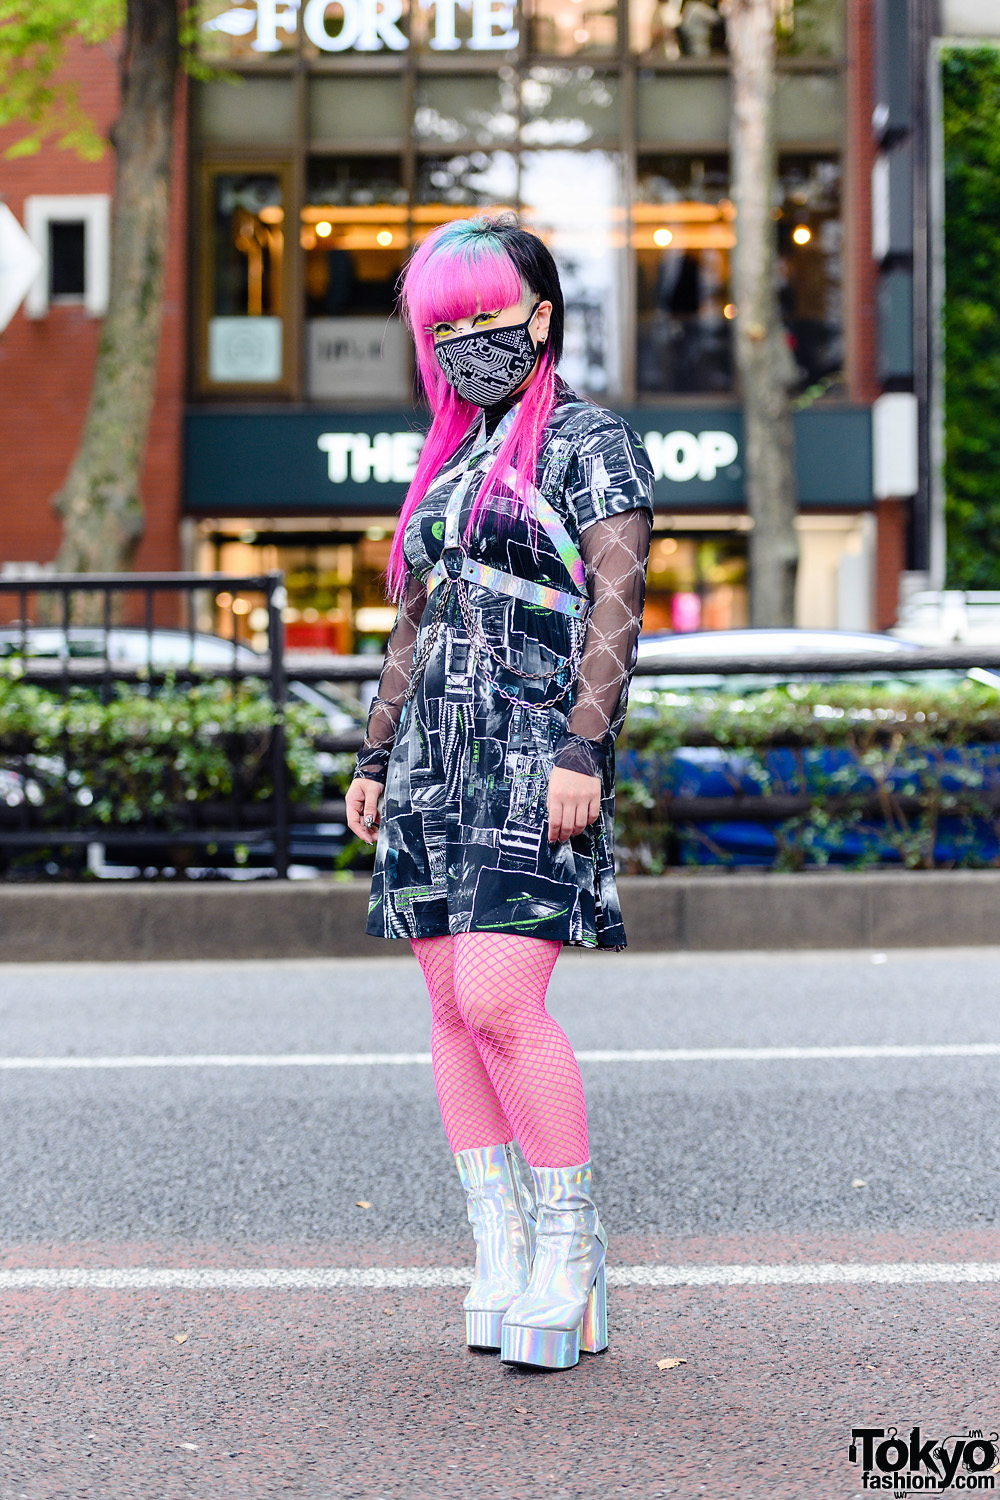 Japanese Cyber Street Style w/ Tri-Color Hair, Winged Eye Makeup, Reflector Harness, Dolls Kill Barbed Wire Top & Iridescent Platform Boots